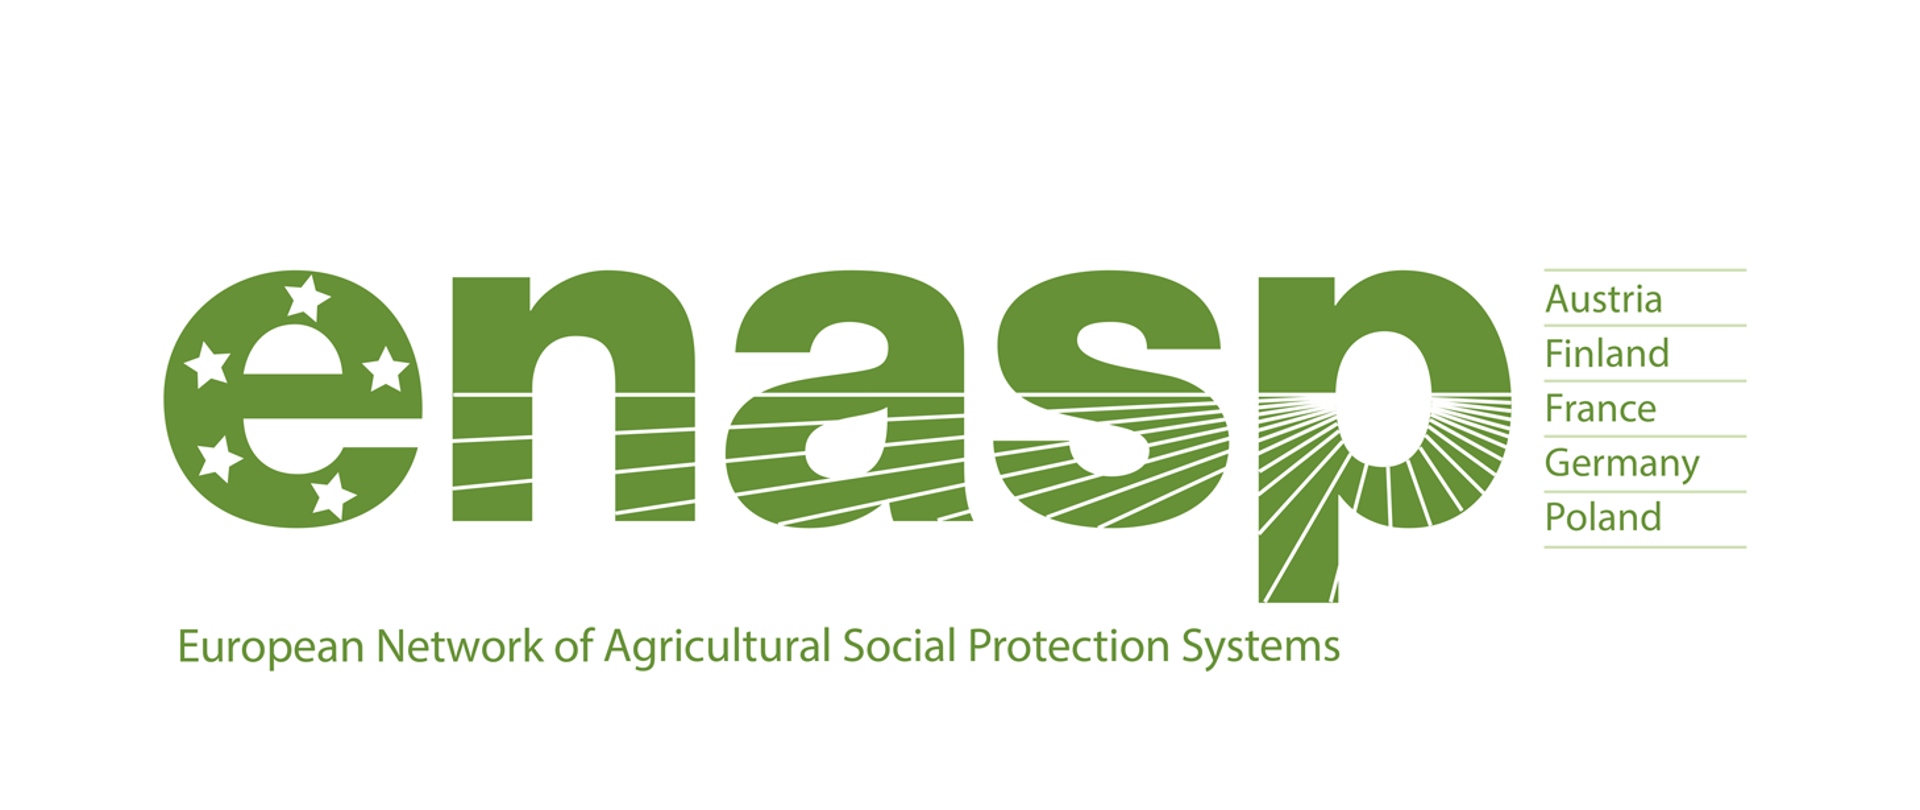 Zielone litery enasp European Network of Agricultural Social Protection Systems na białym tle